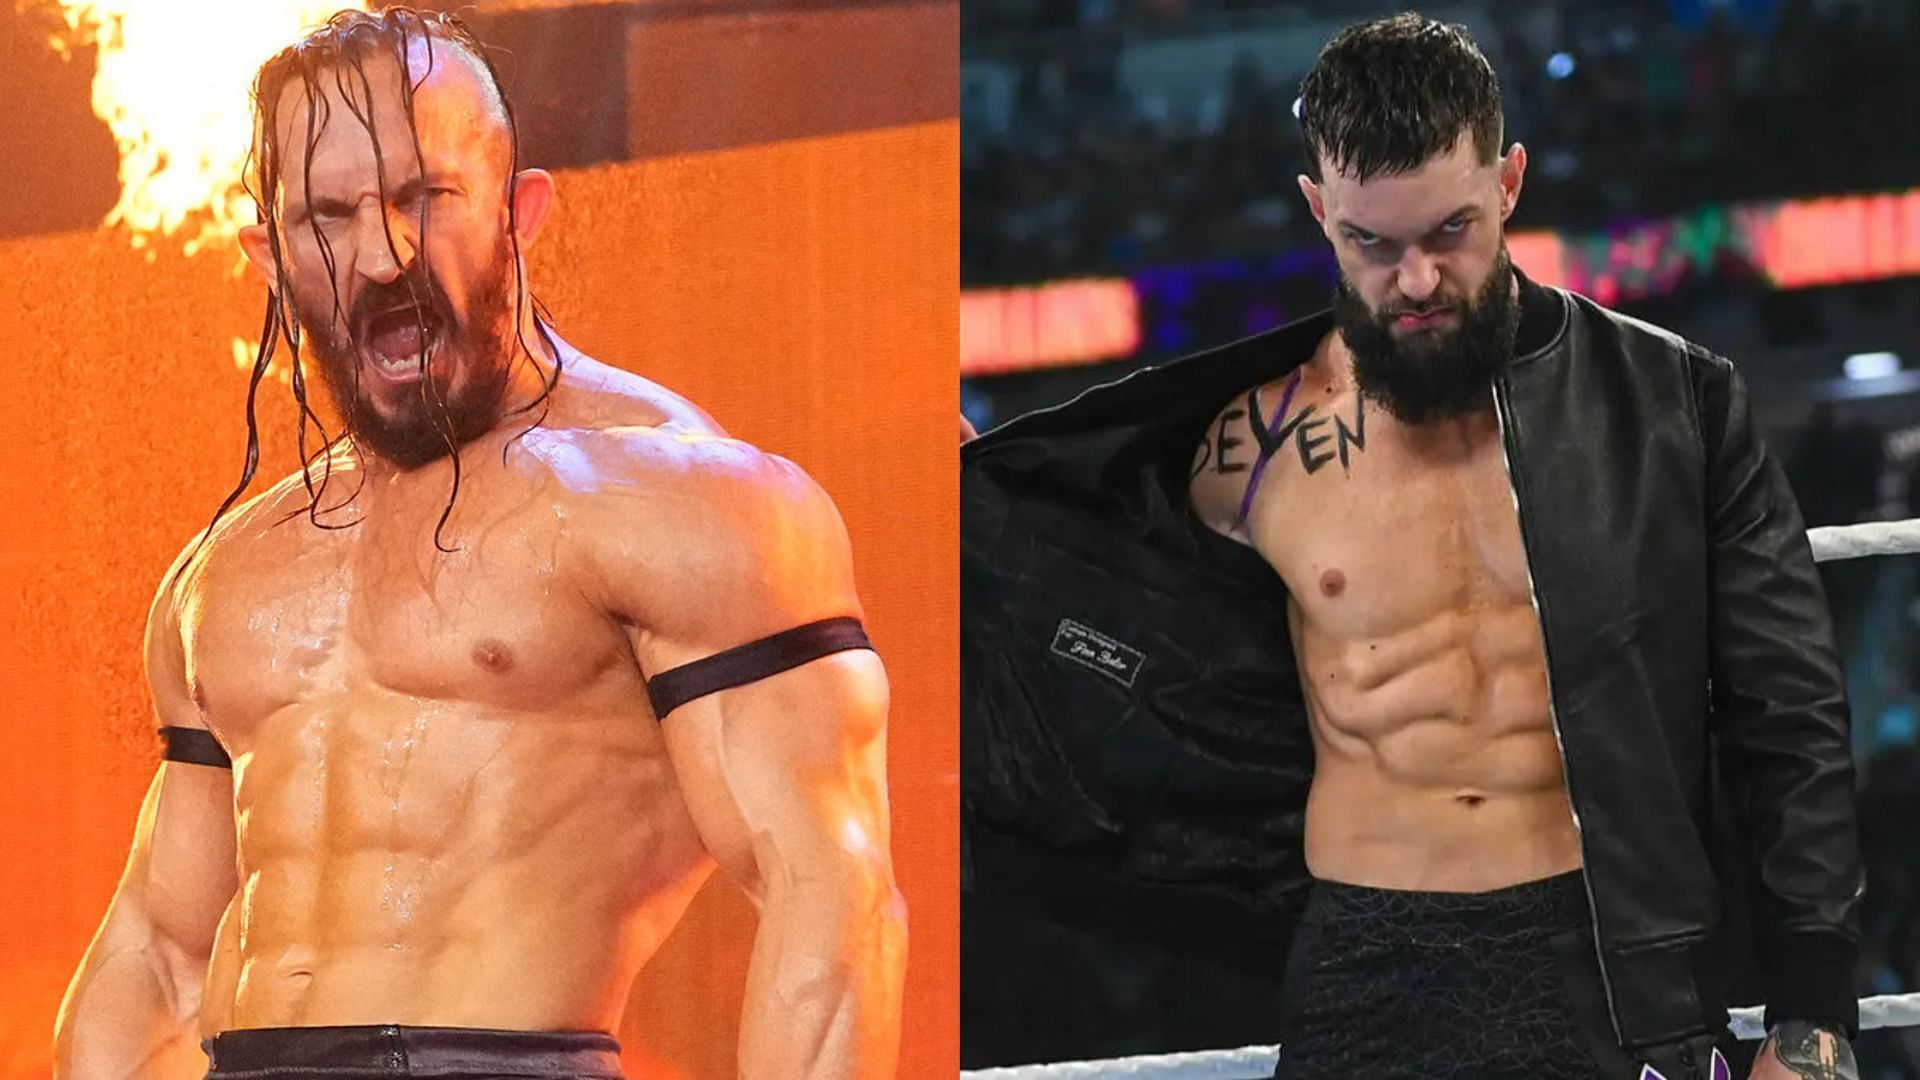 Why did this former WWE star not recognize Finn Balor or PAC?